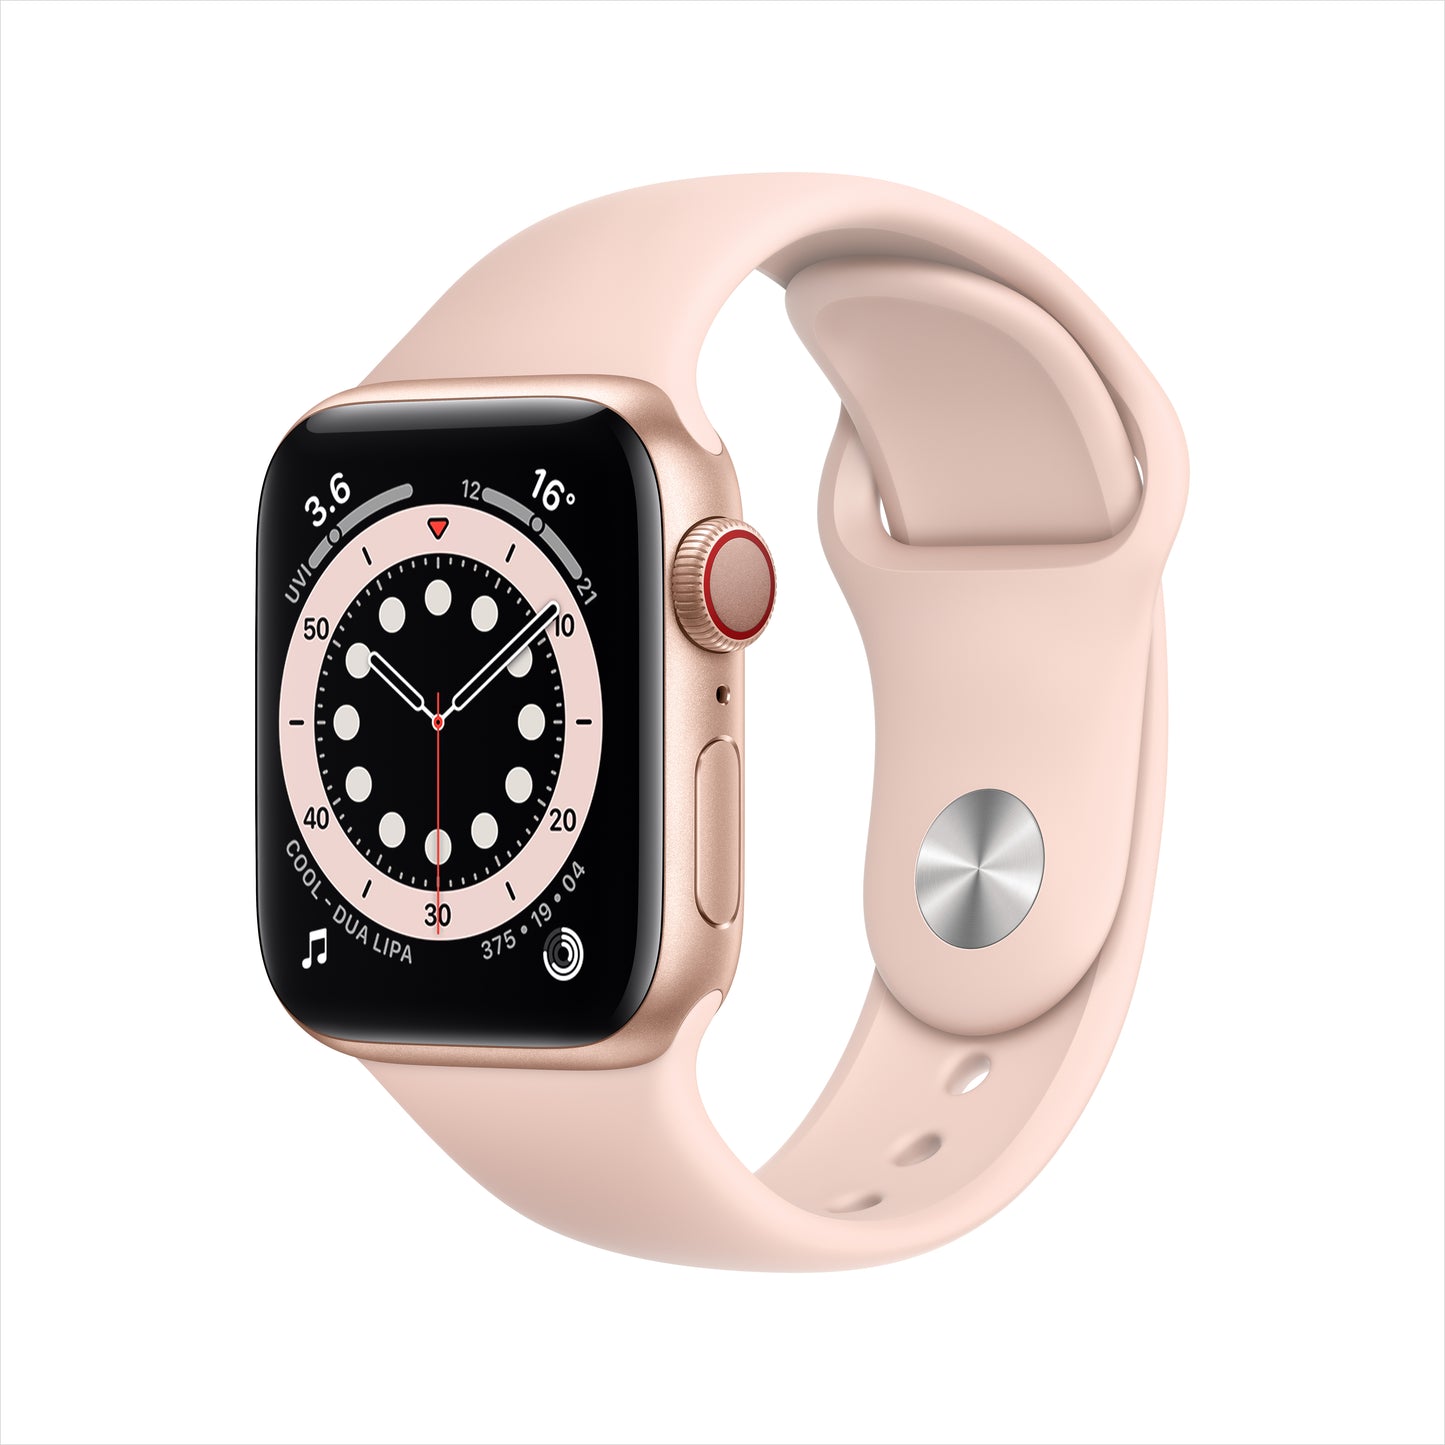 Apple Watch Series 6 Cellular 40mm Gold Aluminium Case with Pink Sand Sport Band